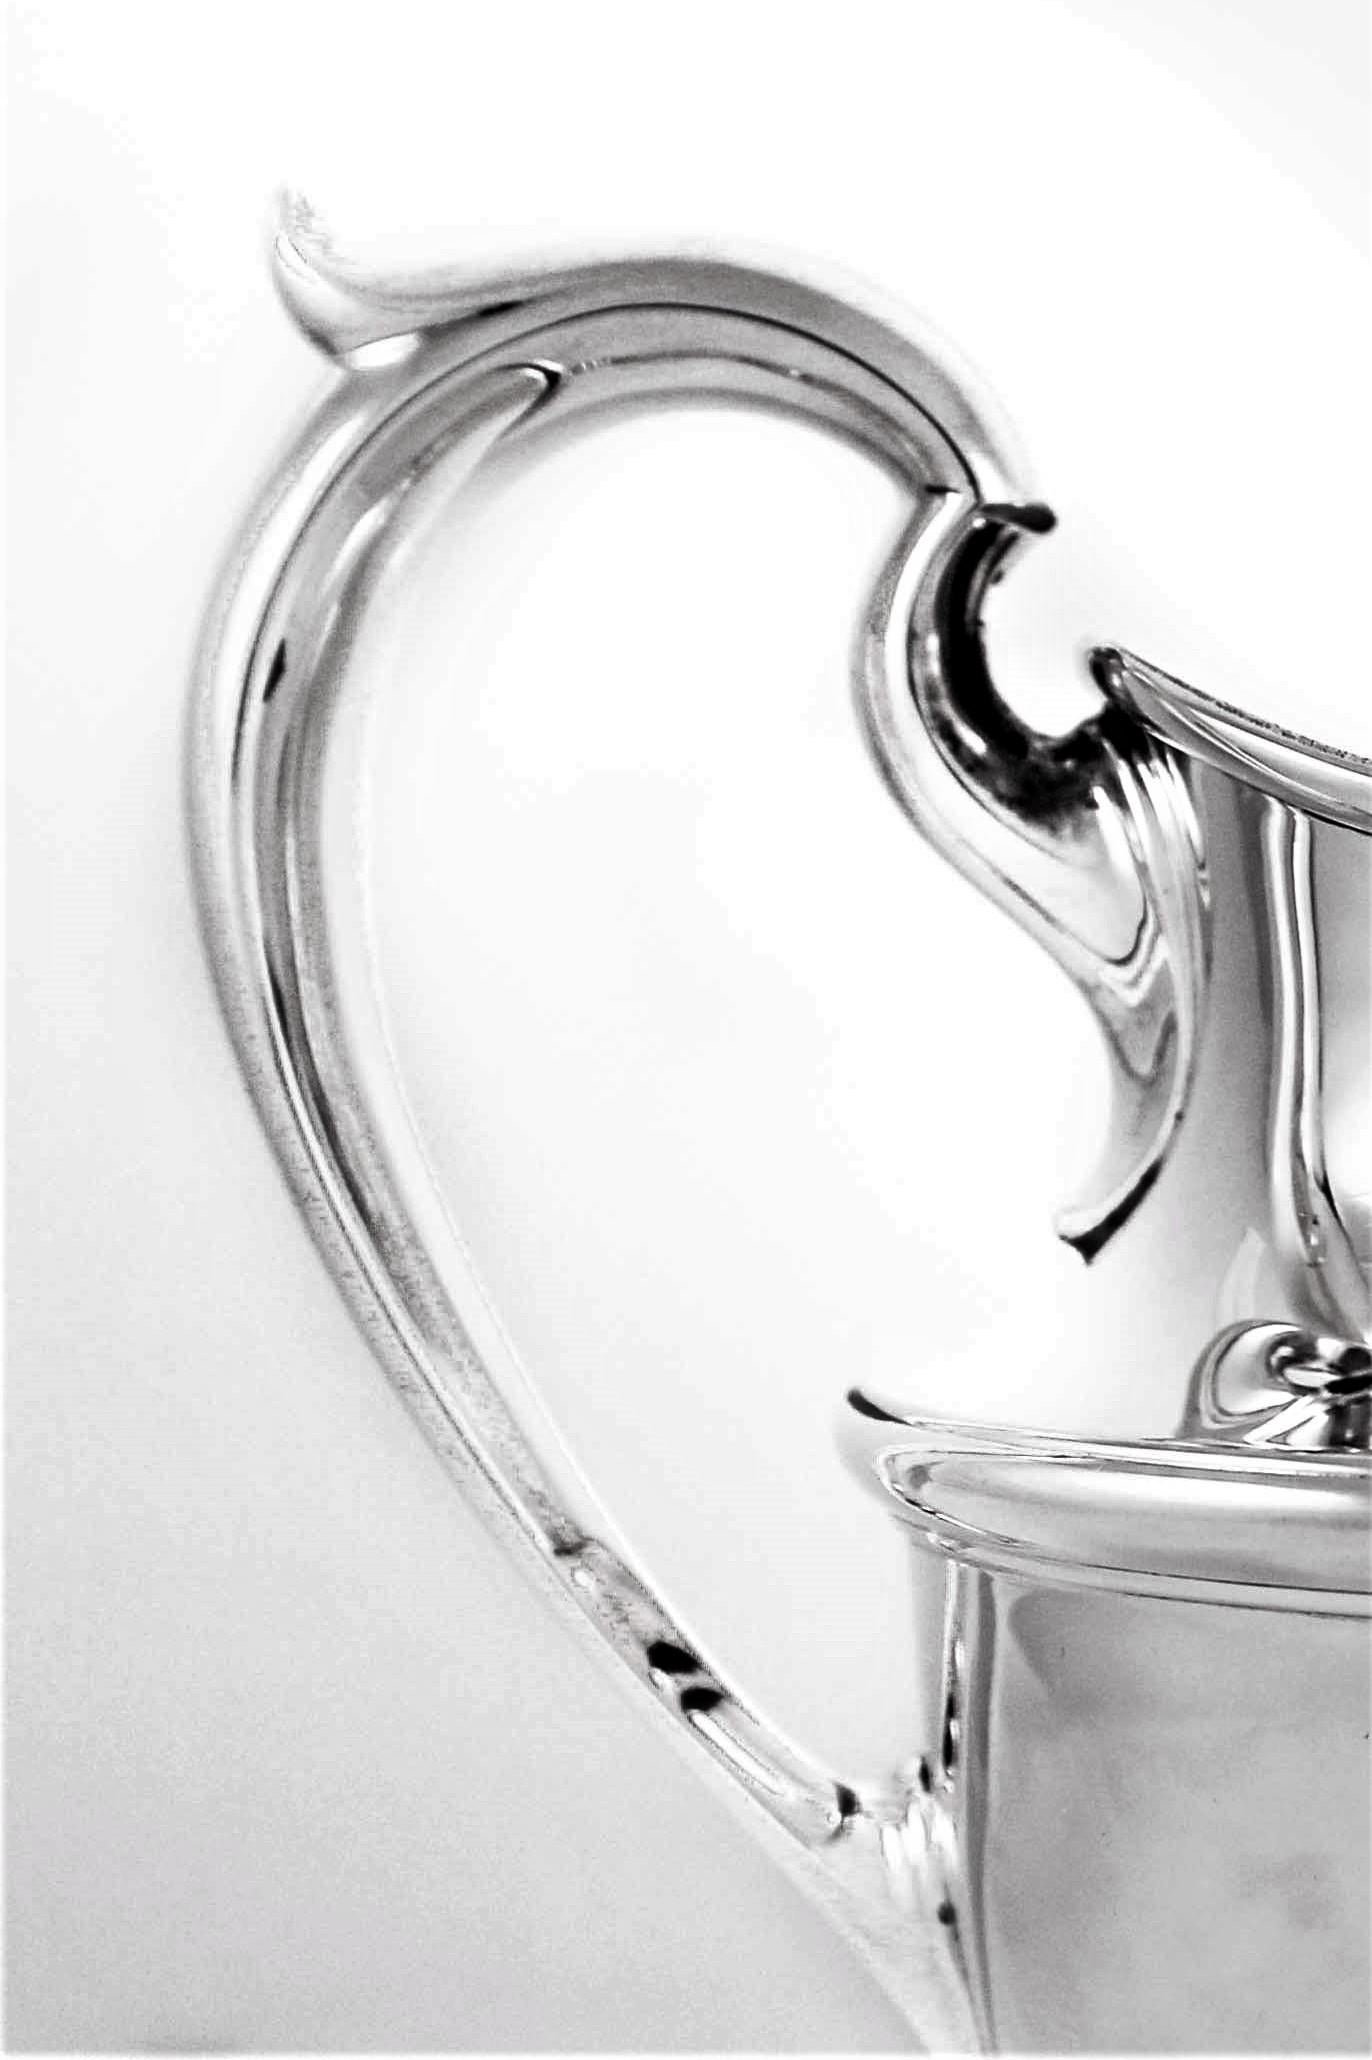 After the great depression of 1929, the decorative style became a lot less ornate and more plain. Simple and unadorned became the style of the times. It reflected the sentiment of the times and was mirrored in the objet d’art. This water pitcher